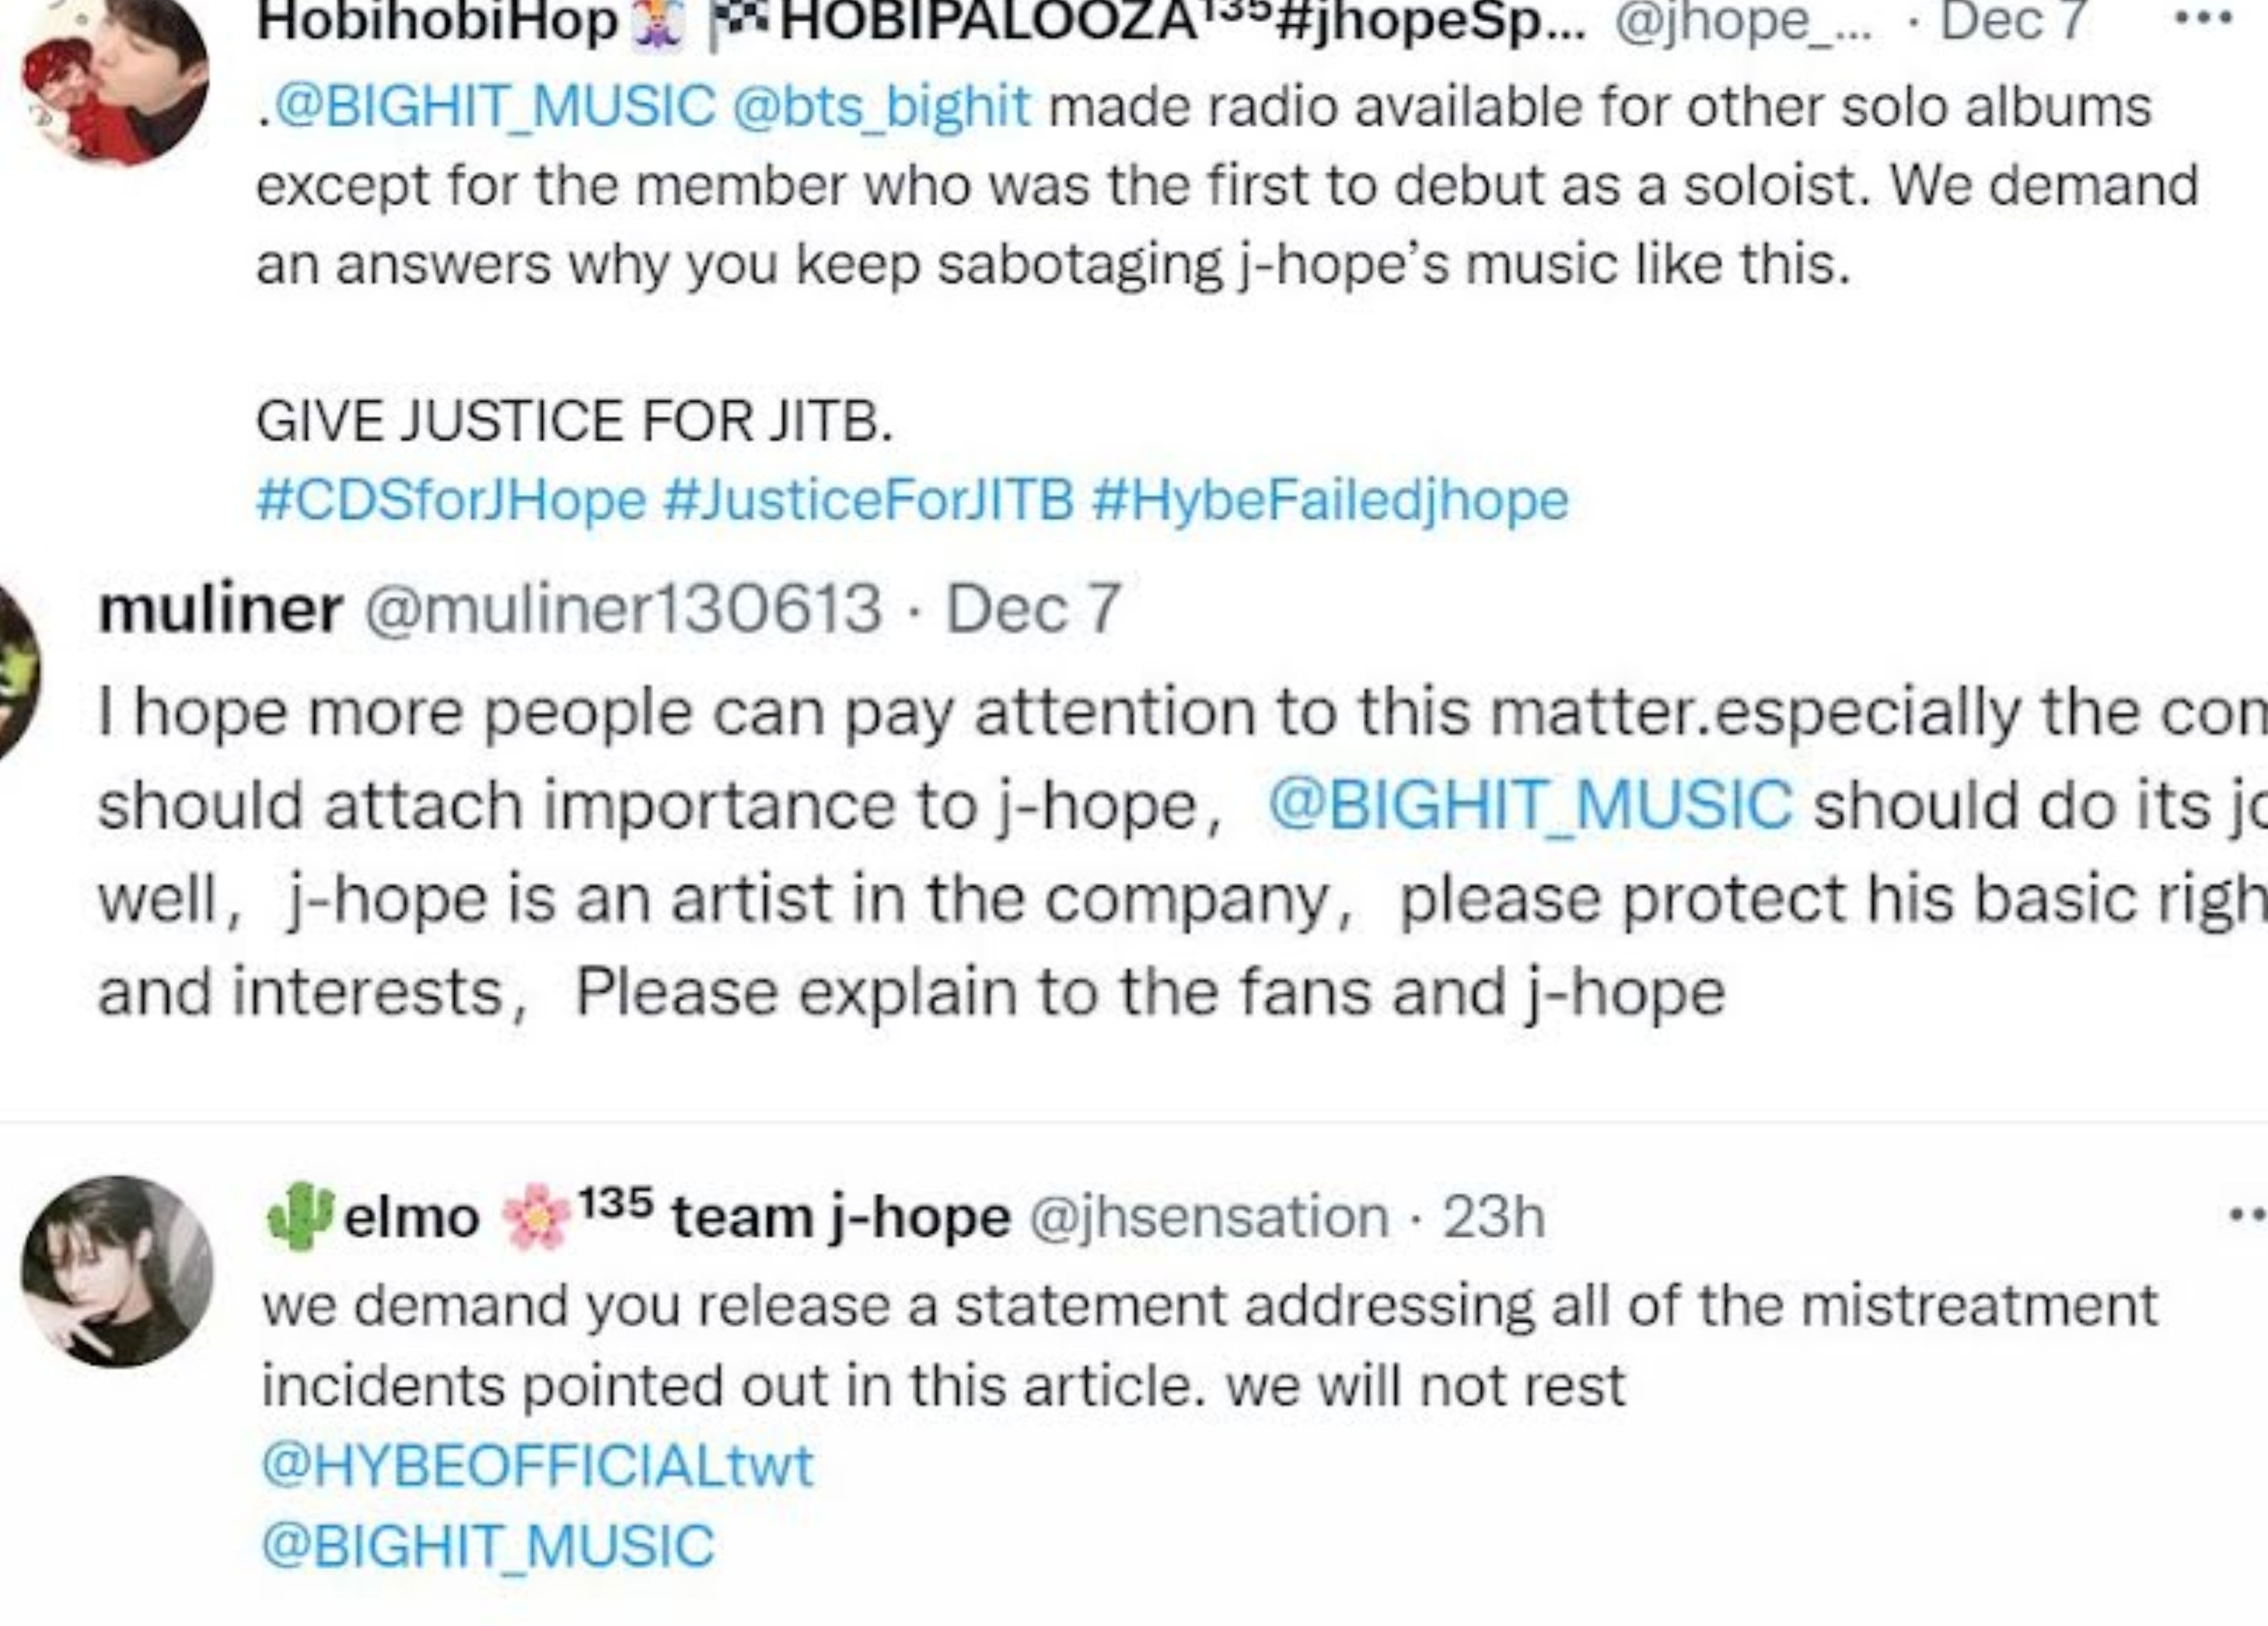 BTS ARMY raise concern over alleged mistreatment of J-Hope by HYBE